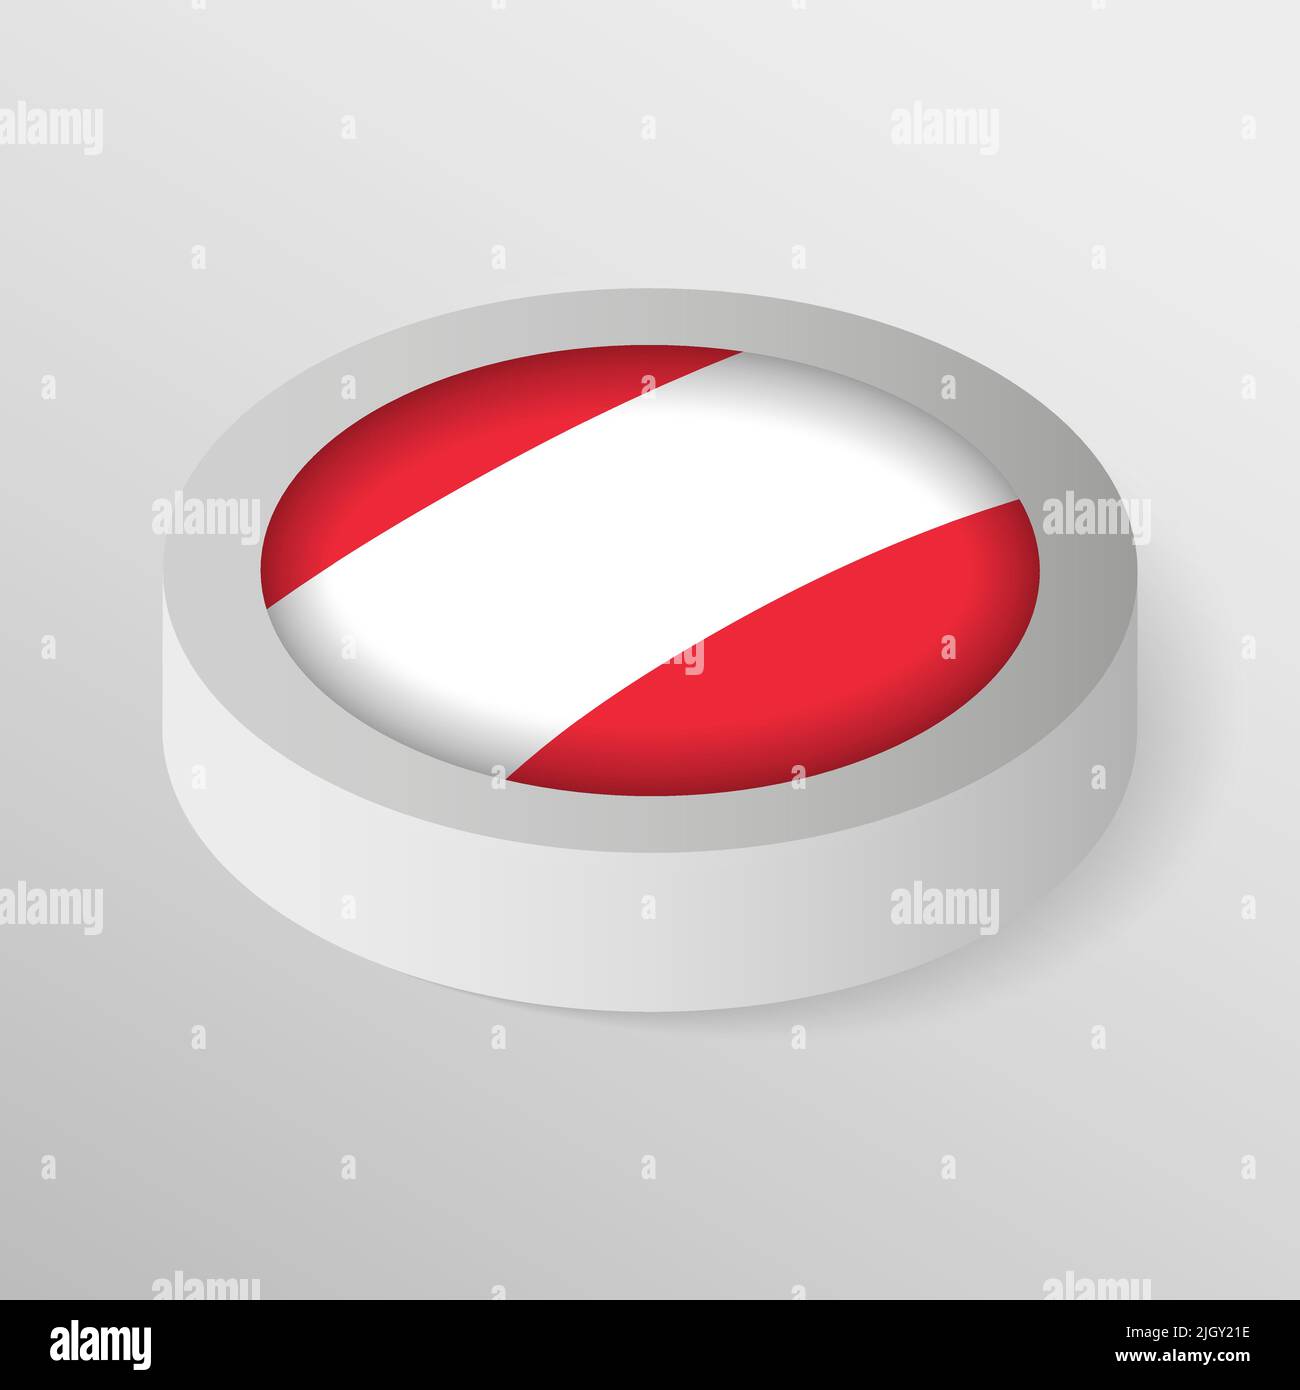 EPS10 Vector Patriotic shield with flag of Austria. An element of impact for the use you want to make of it. Stock Vector